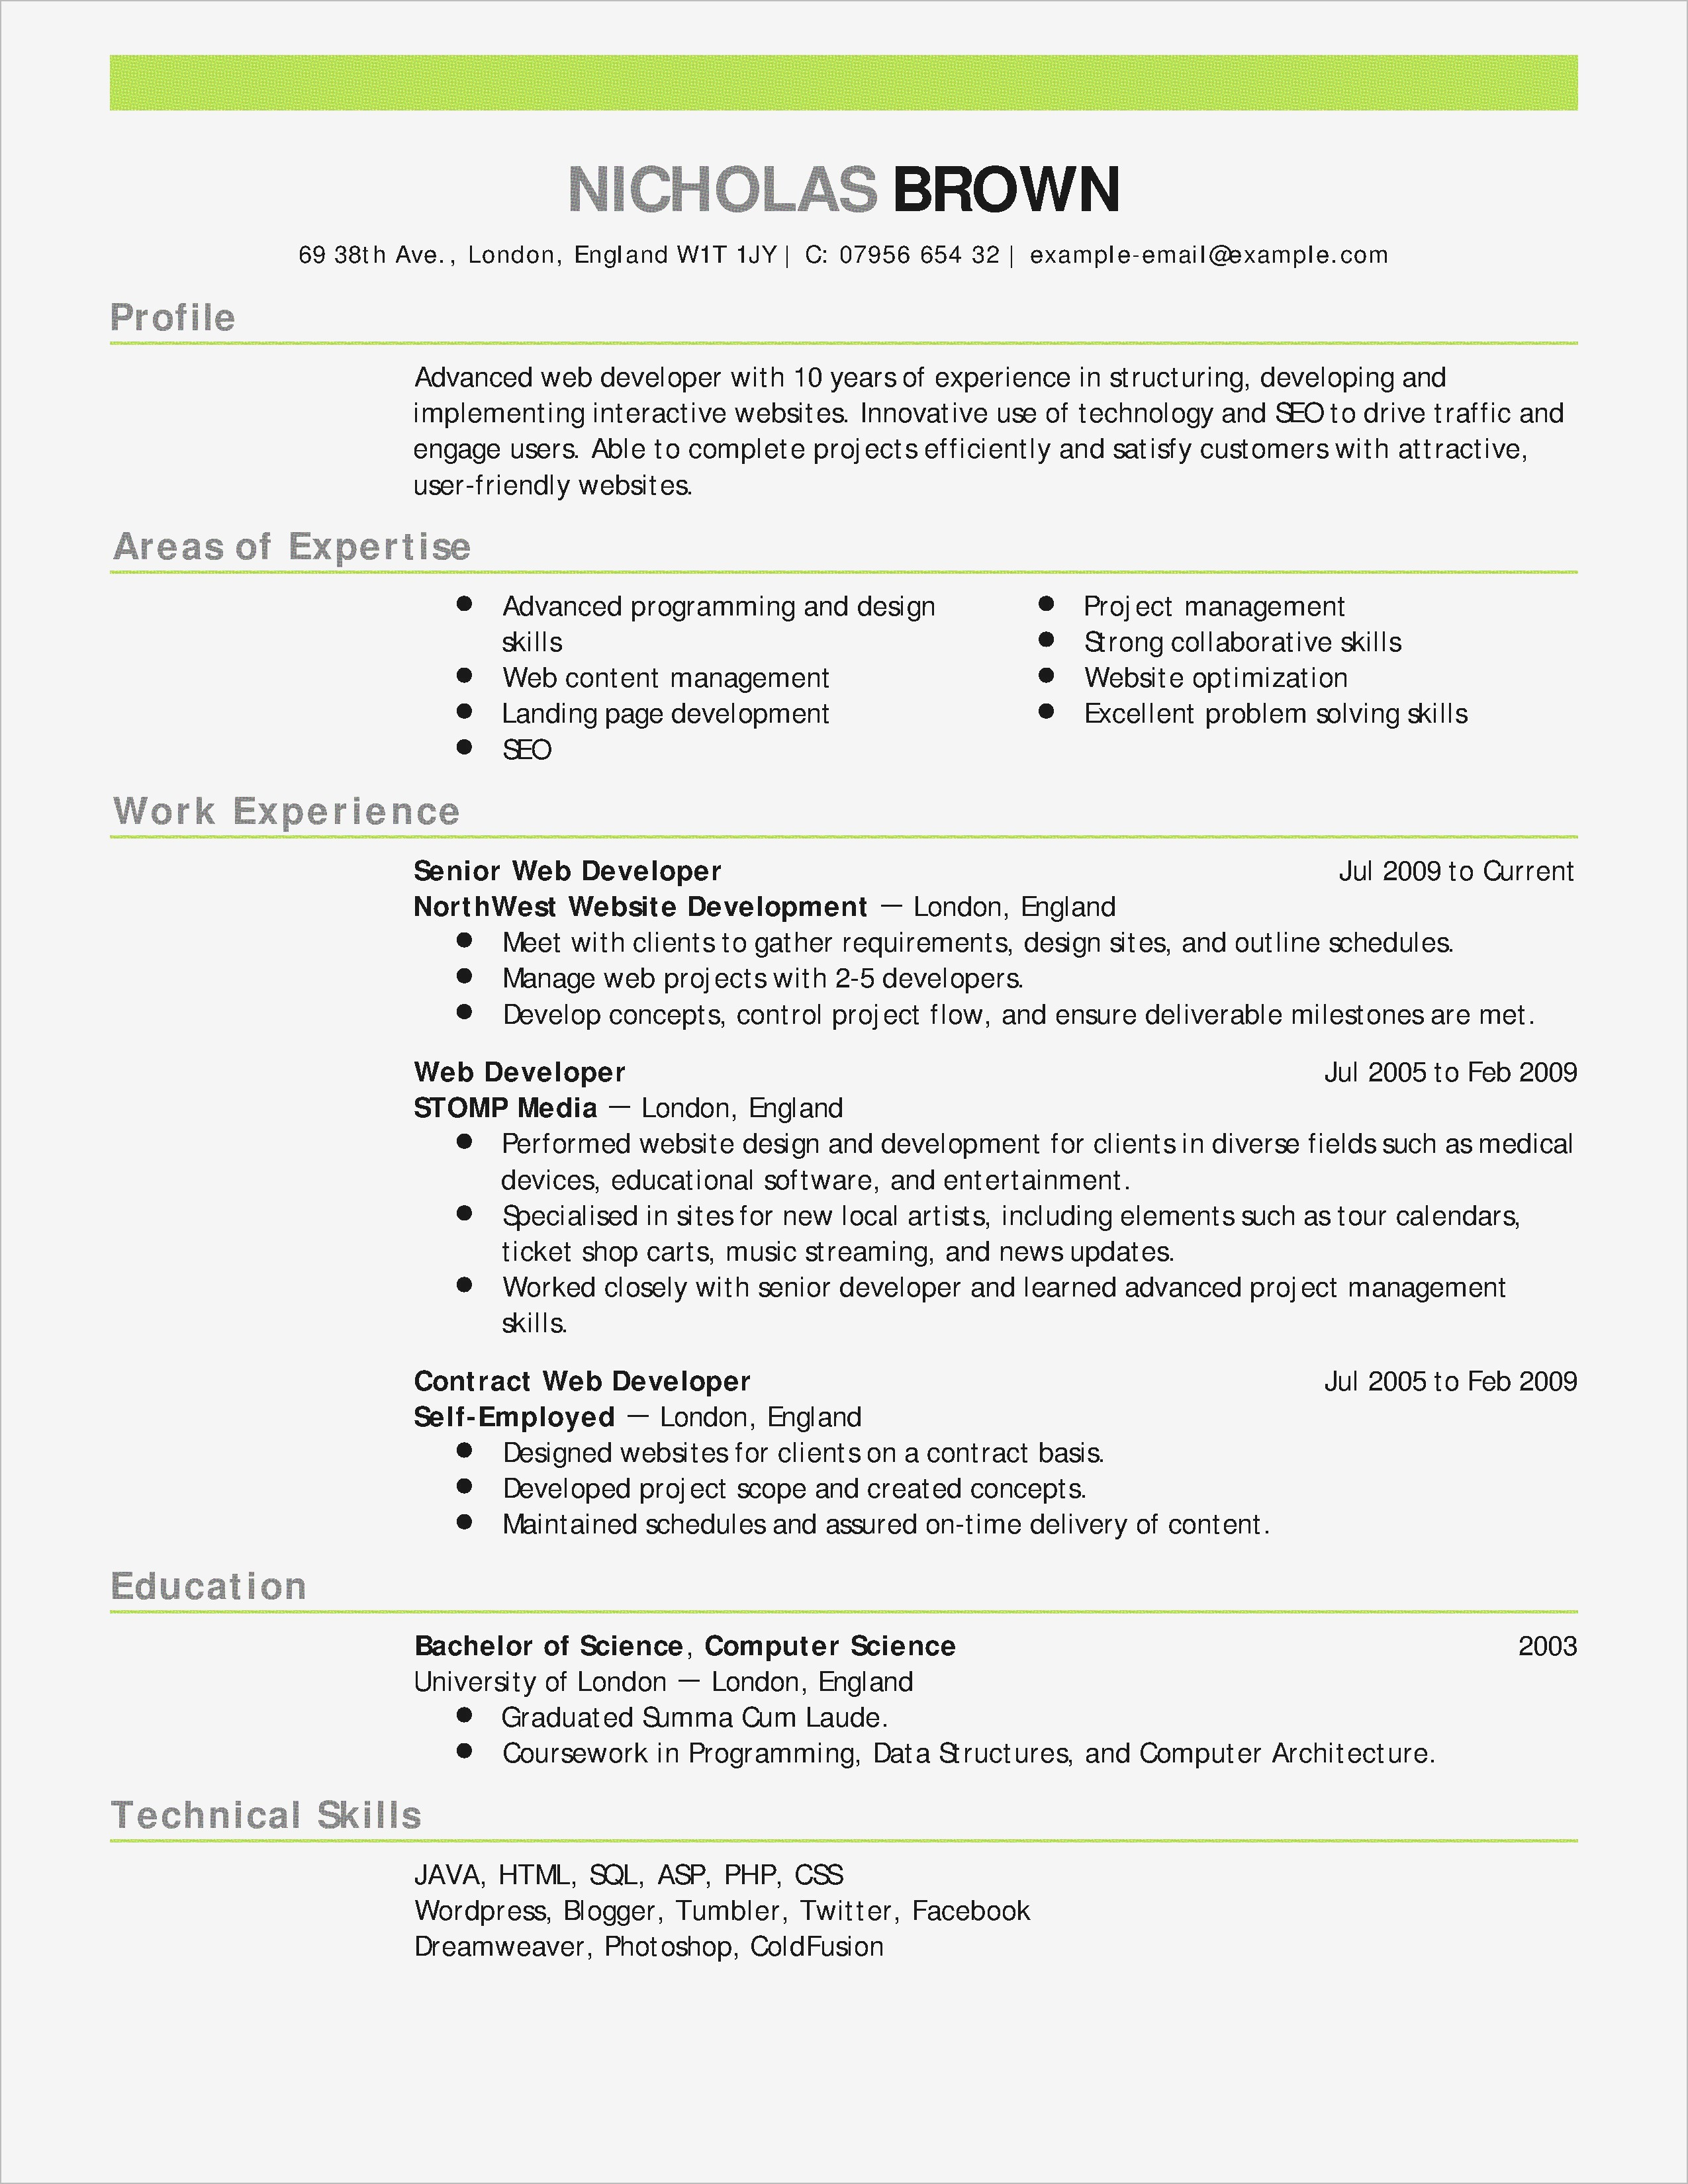 Cover Letter Template Google Docs - Luxury Cover Letter Template Google Docs